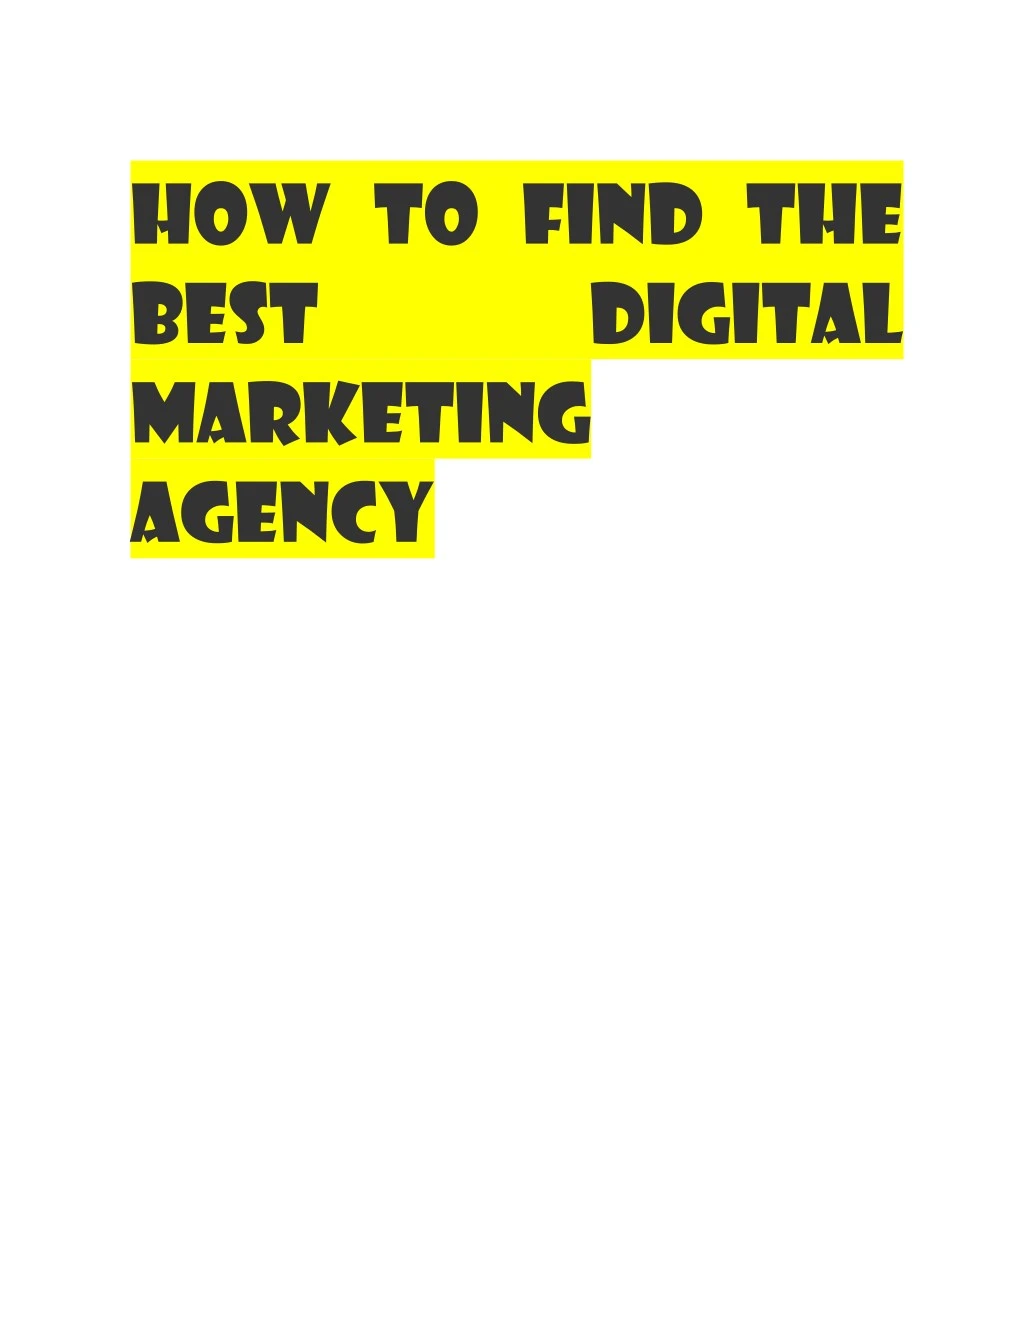 how to find the best marketing agency